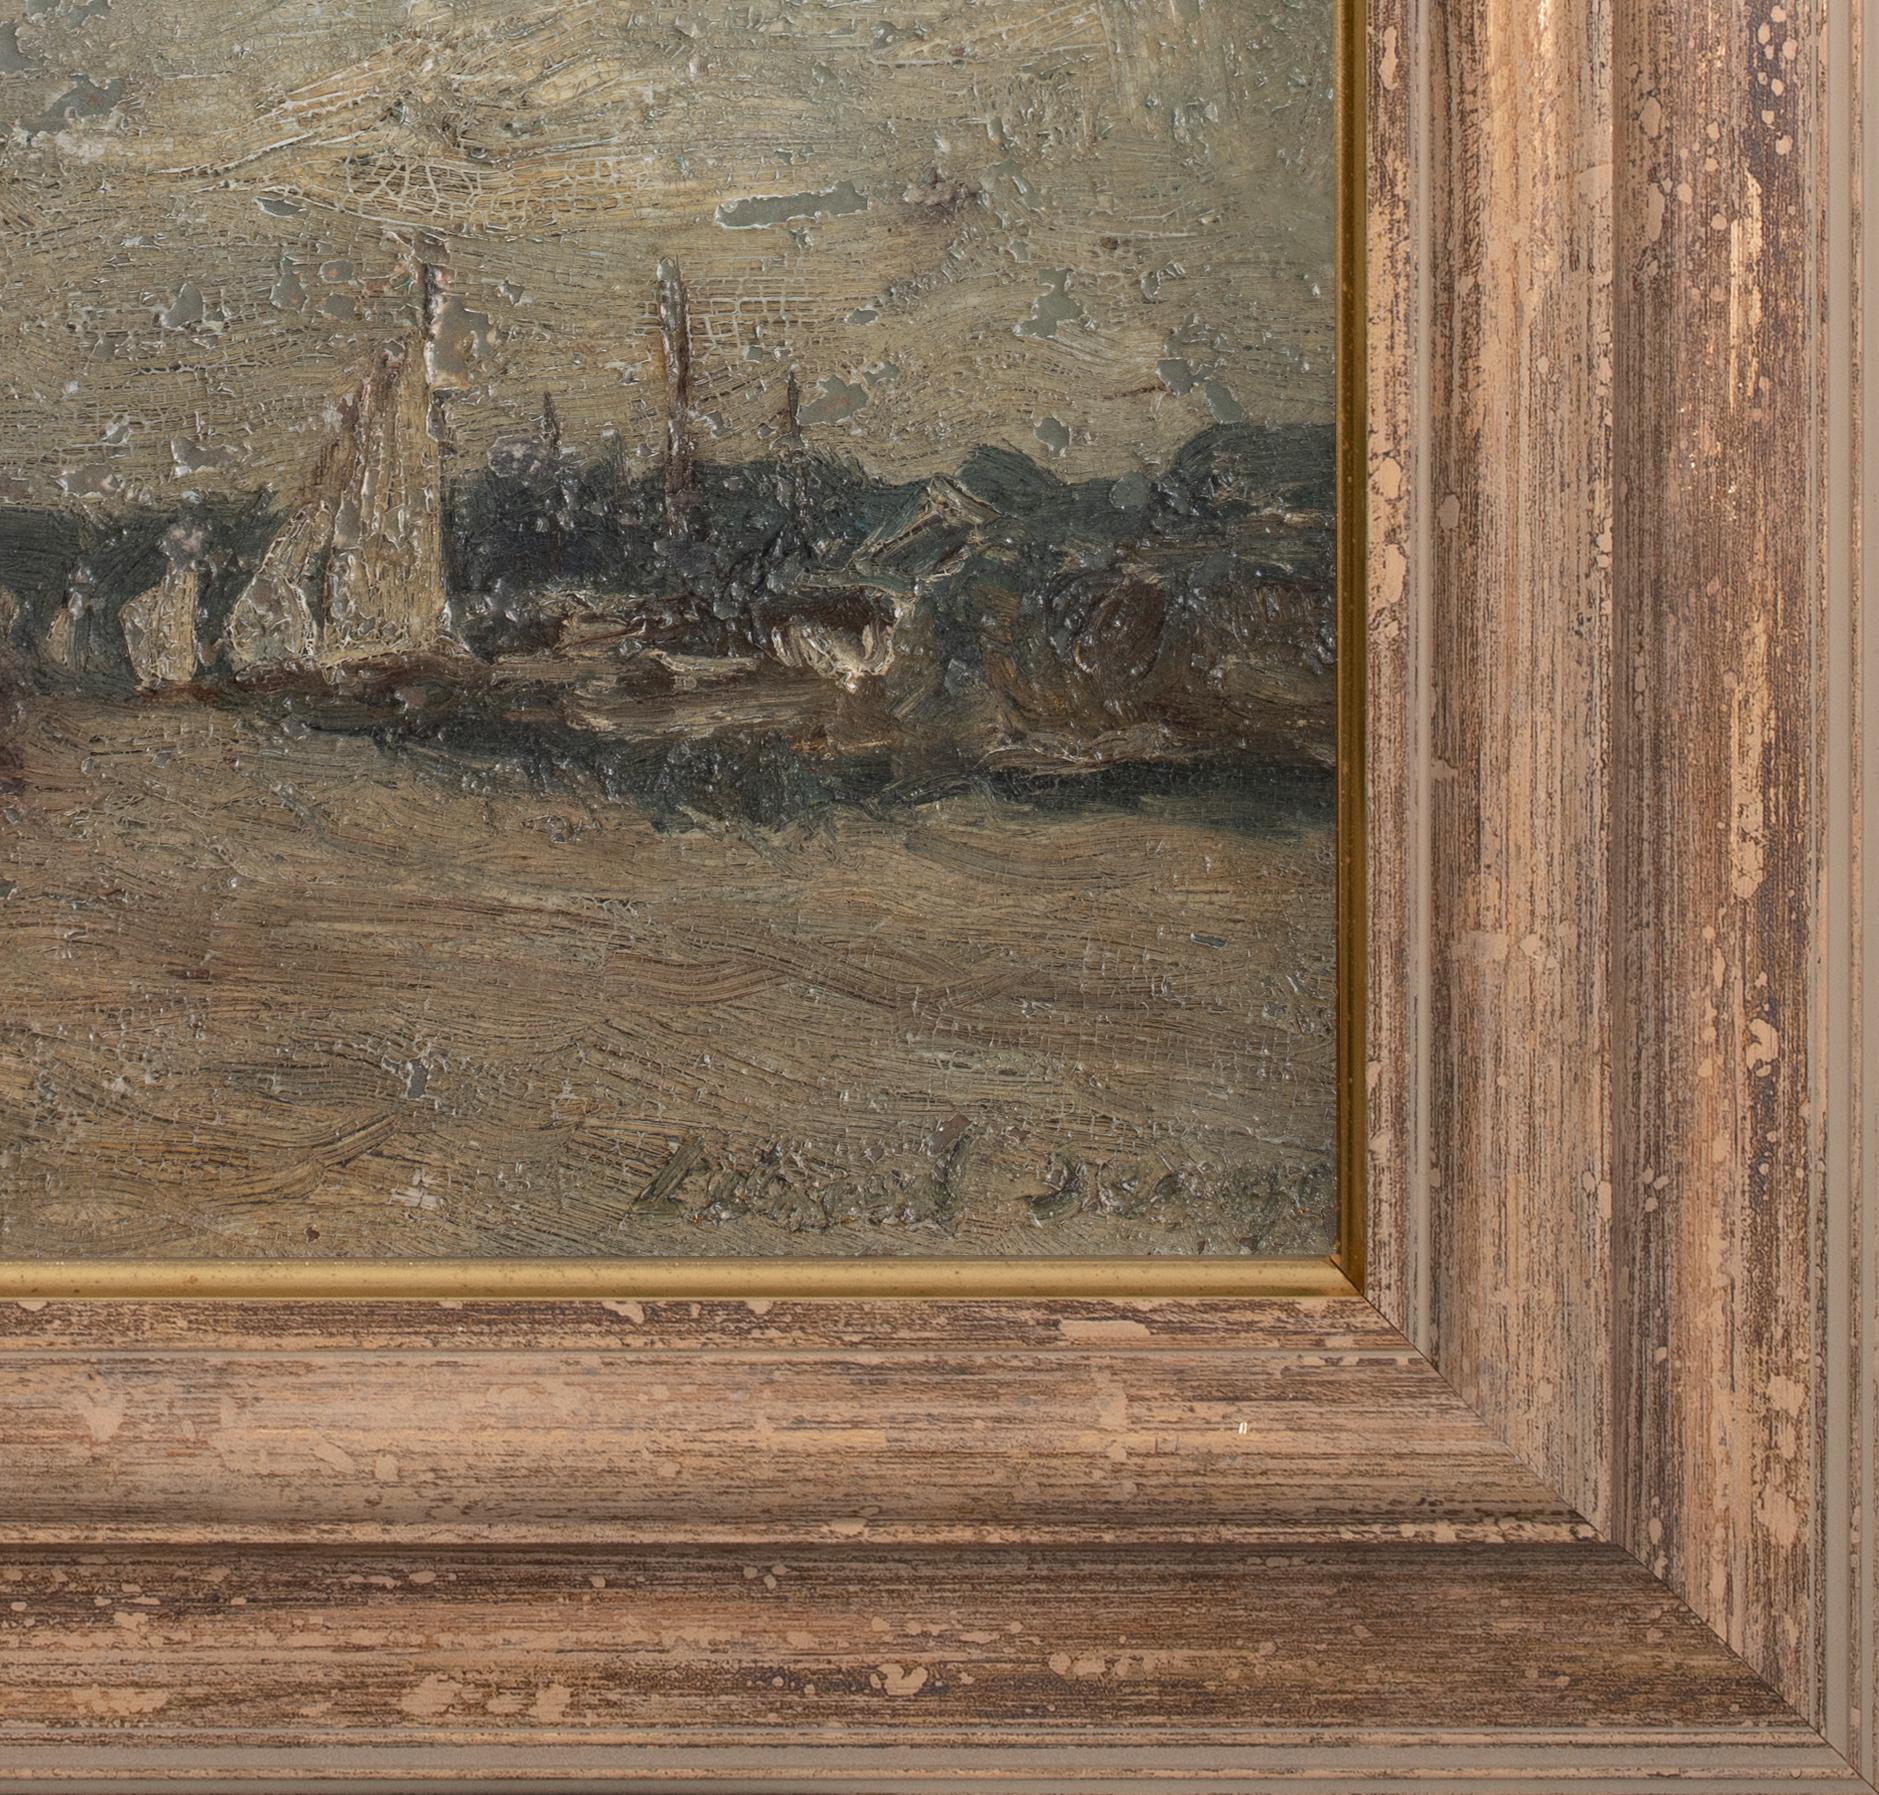 Boat Harbour Off The Suffolk Coast, 20th Century

by Edward Brian SEAGO (1910-1974) sales to £280,000

20th Century English view of a boats in a Suffolk Harbour, oil on board by Edward Seago. Good quality and condition example of the artists work